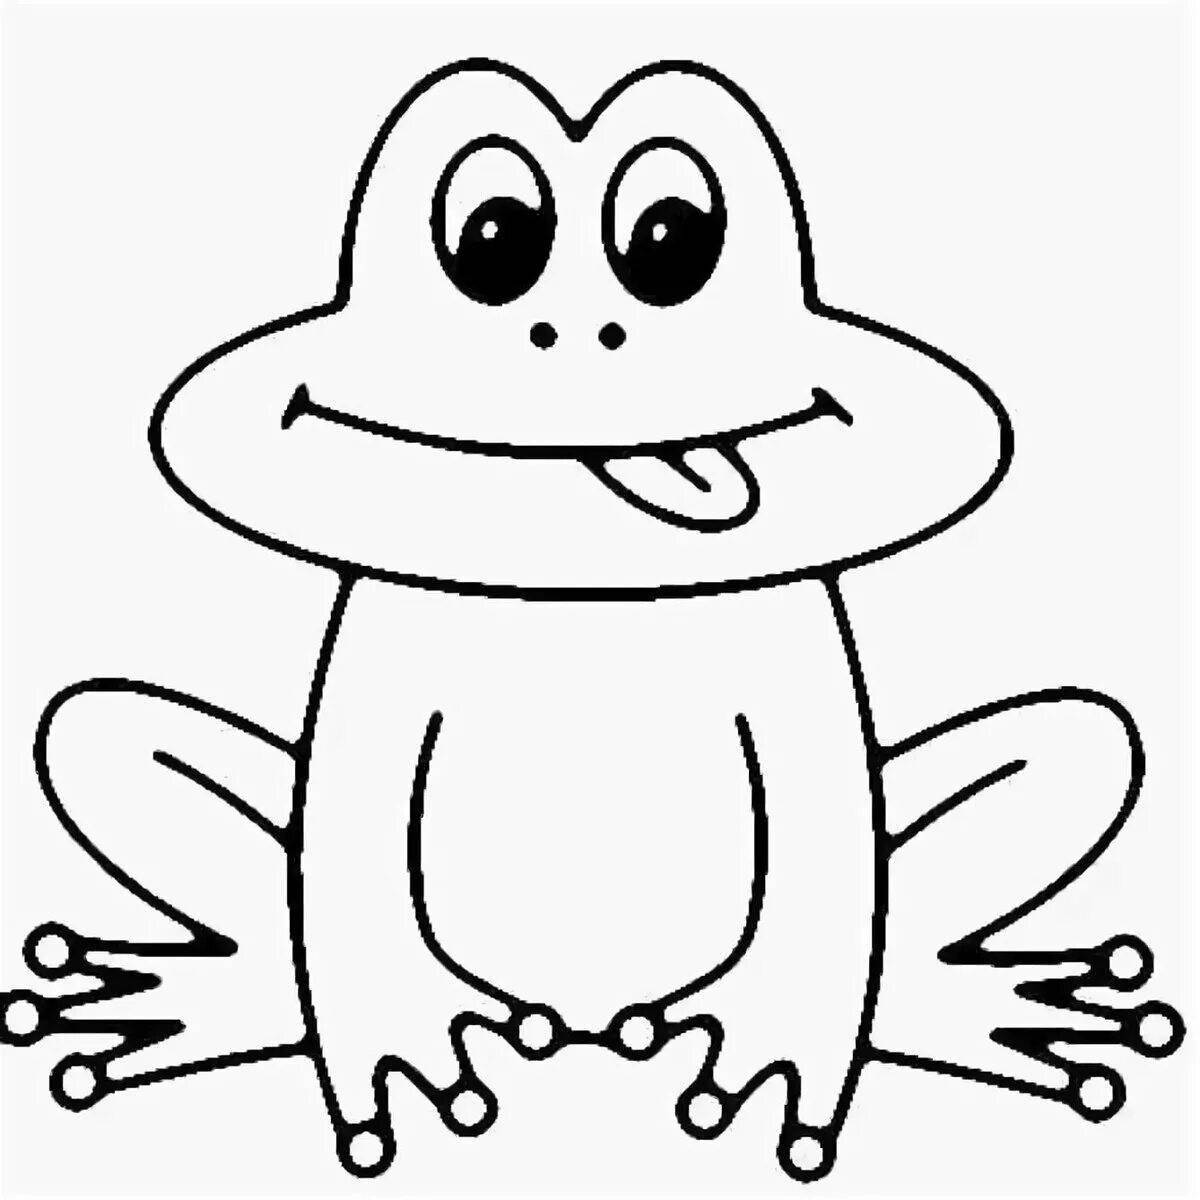 Incredible frog coloring book for kids